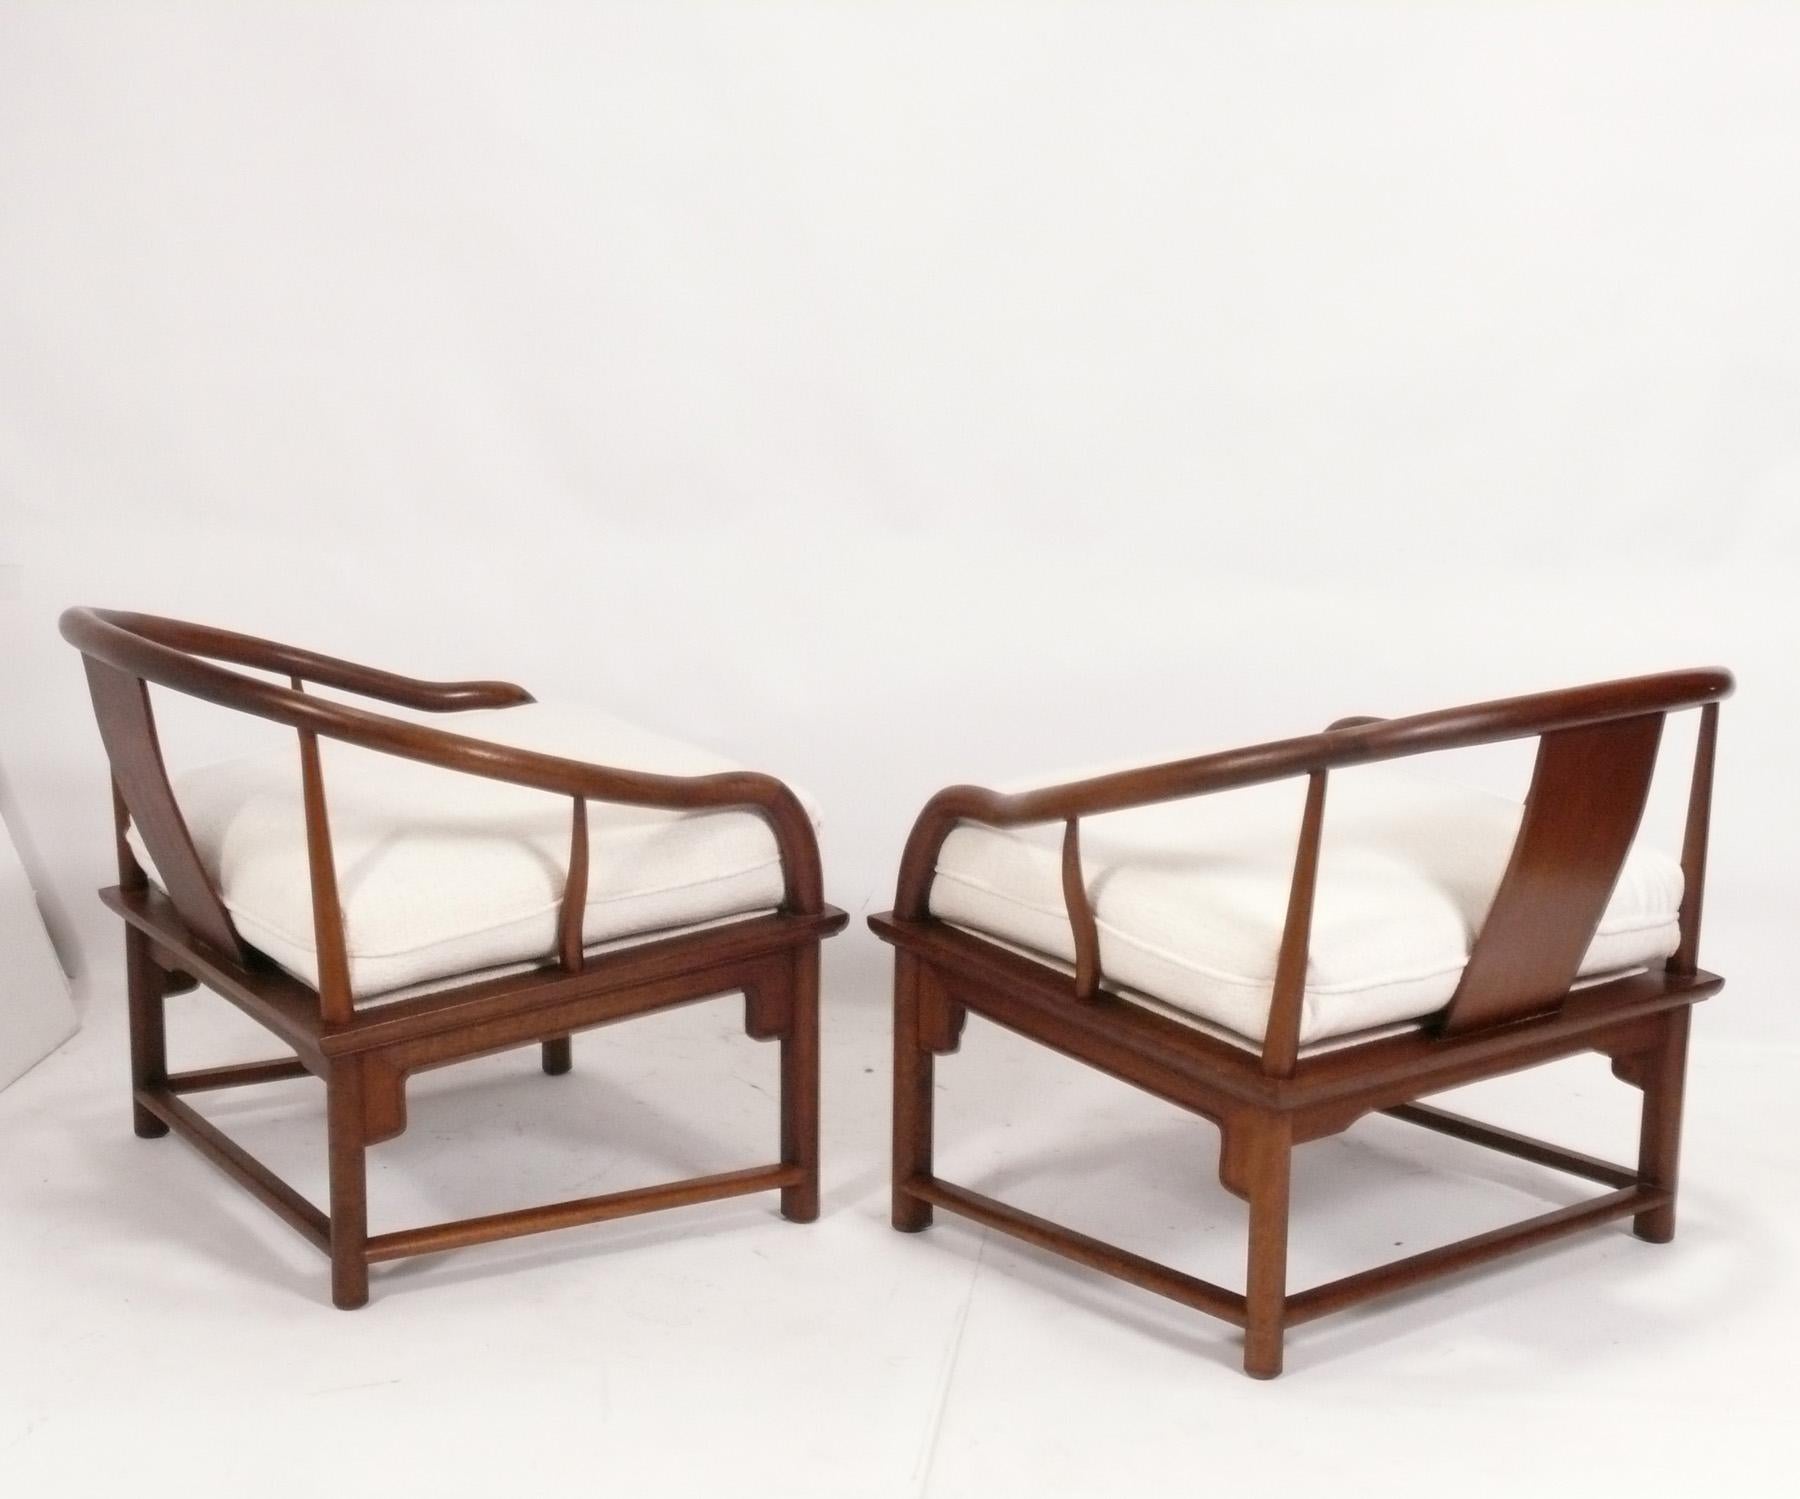 American Pair of Asian Influenced Horseshoe Back Lounge Chairs by Michael Taylor Baker For Sale